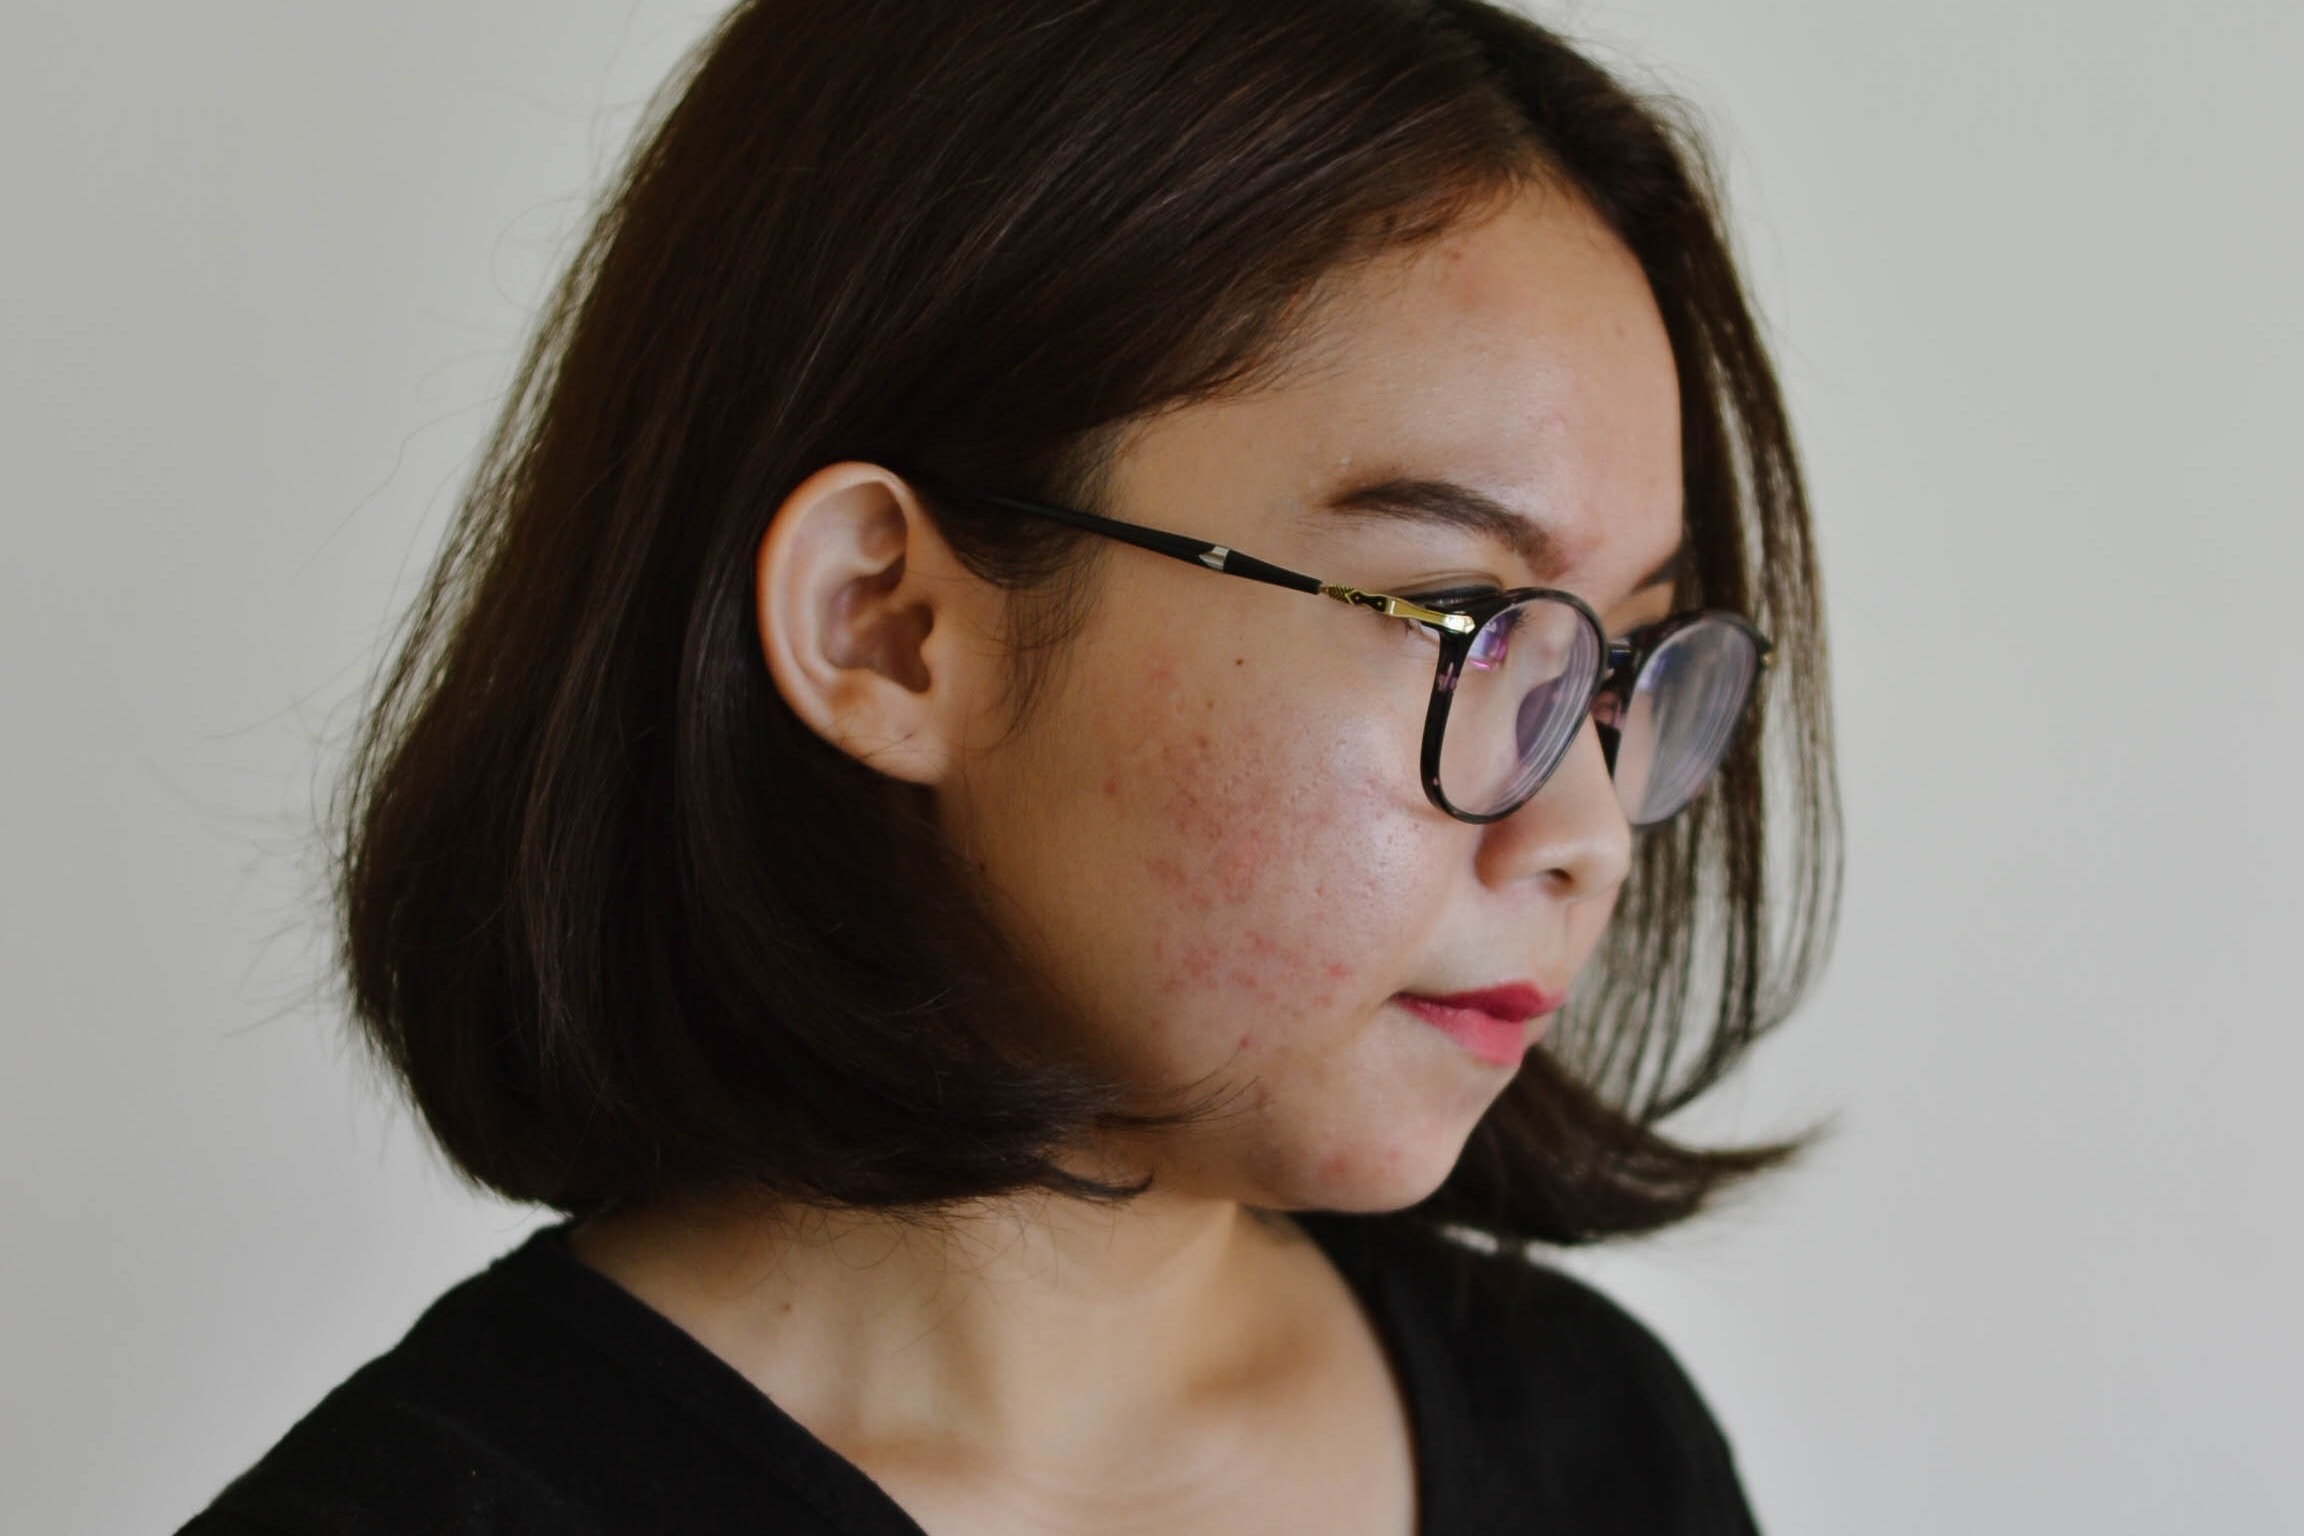 audrey-jackson-unsplash-woman with short bob hair is wearing glasses and looking to the side. Her cheek has small red blemishes. 1200 x 800